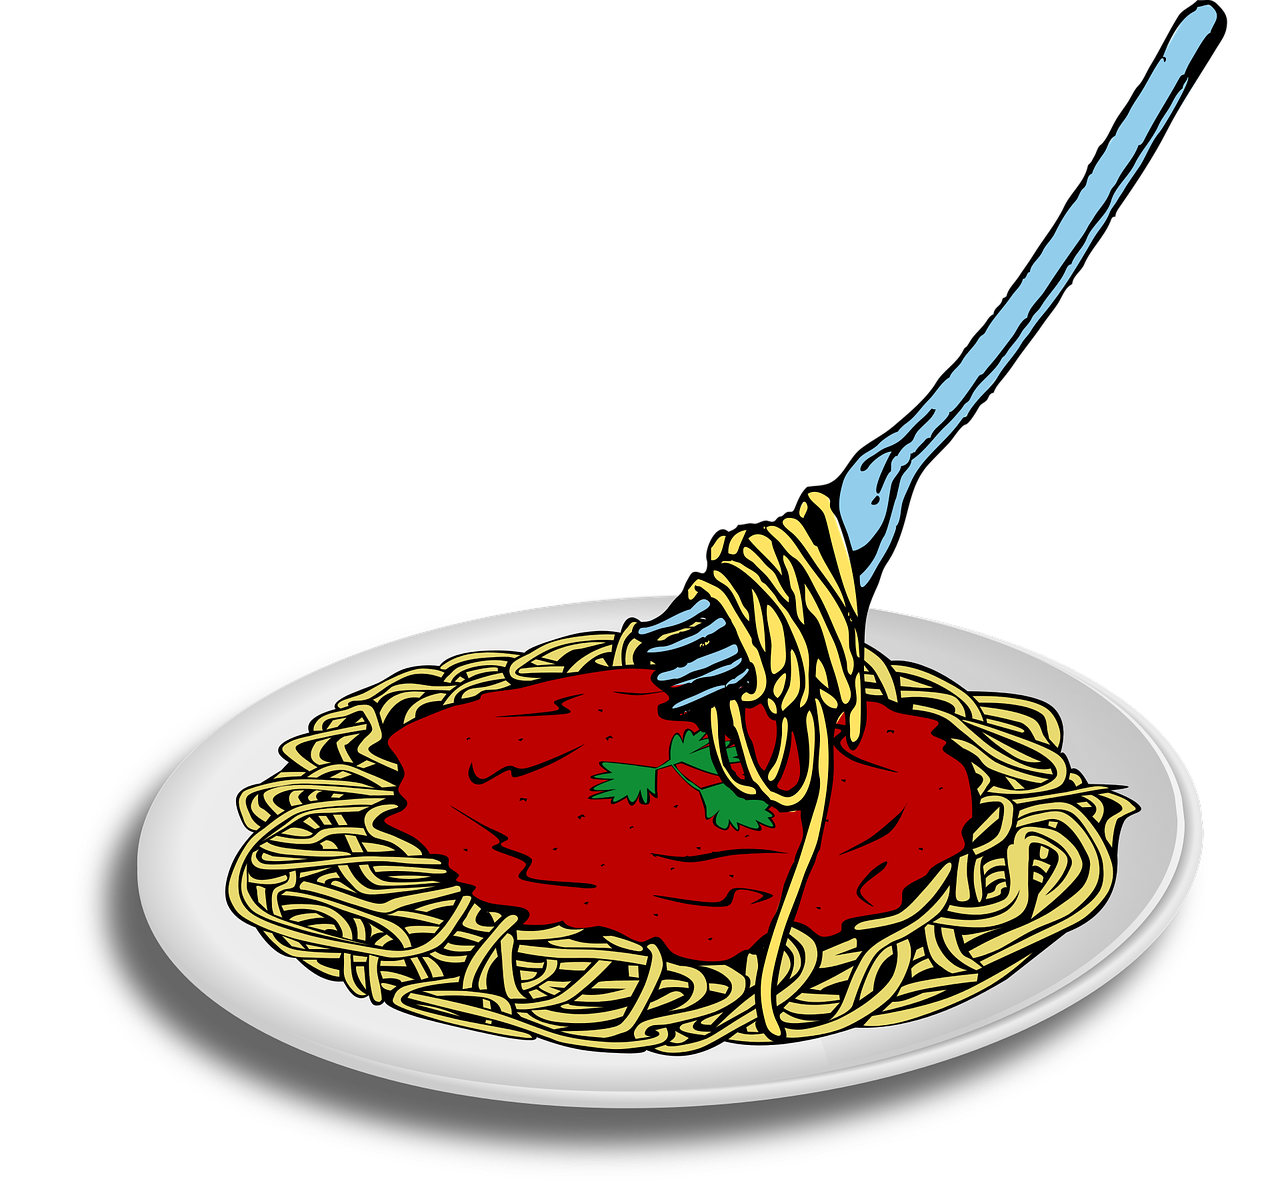 Noodles clipart spagetti, Noodles spagetti Transparent FREE for